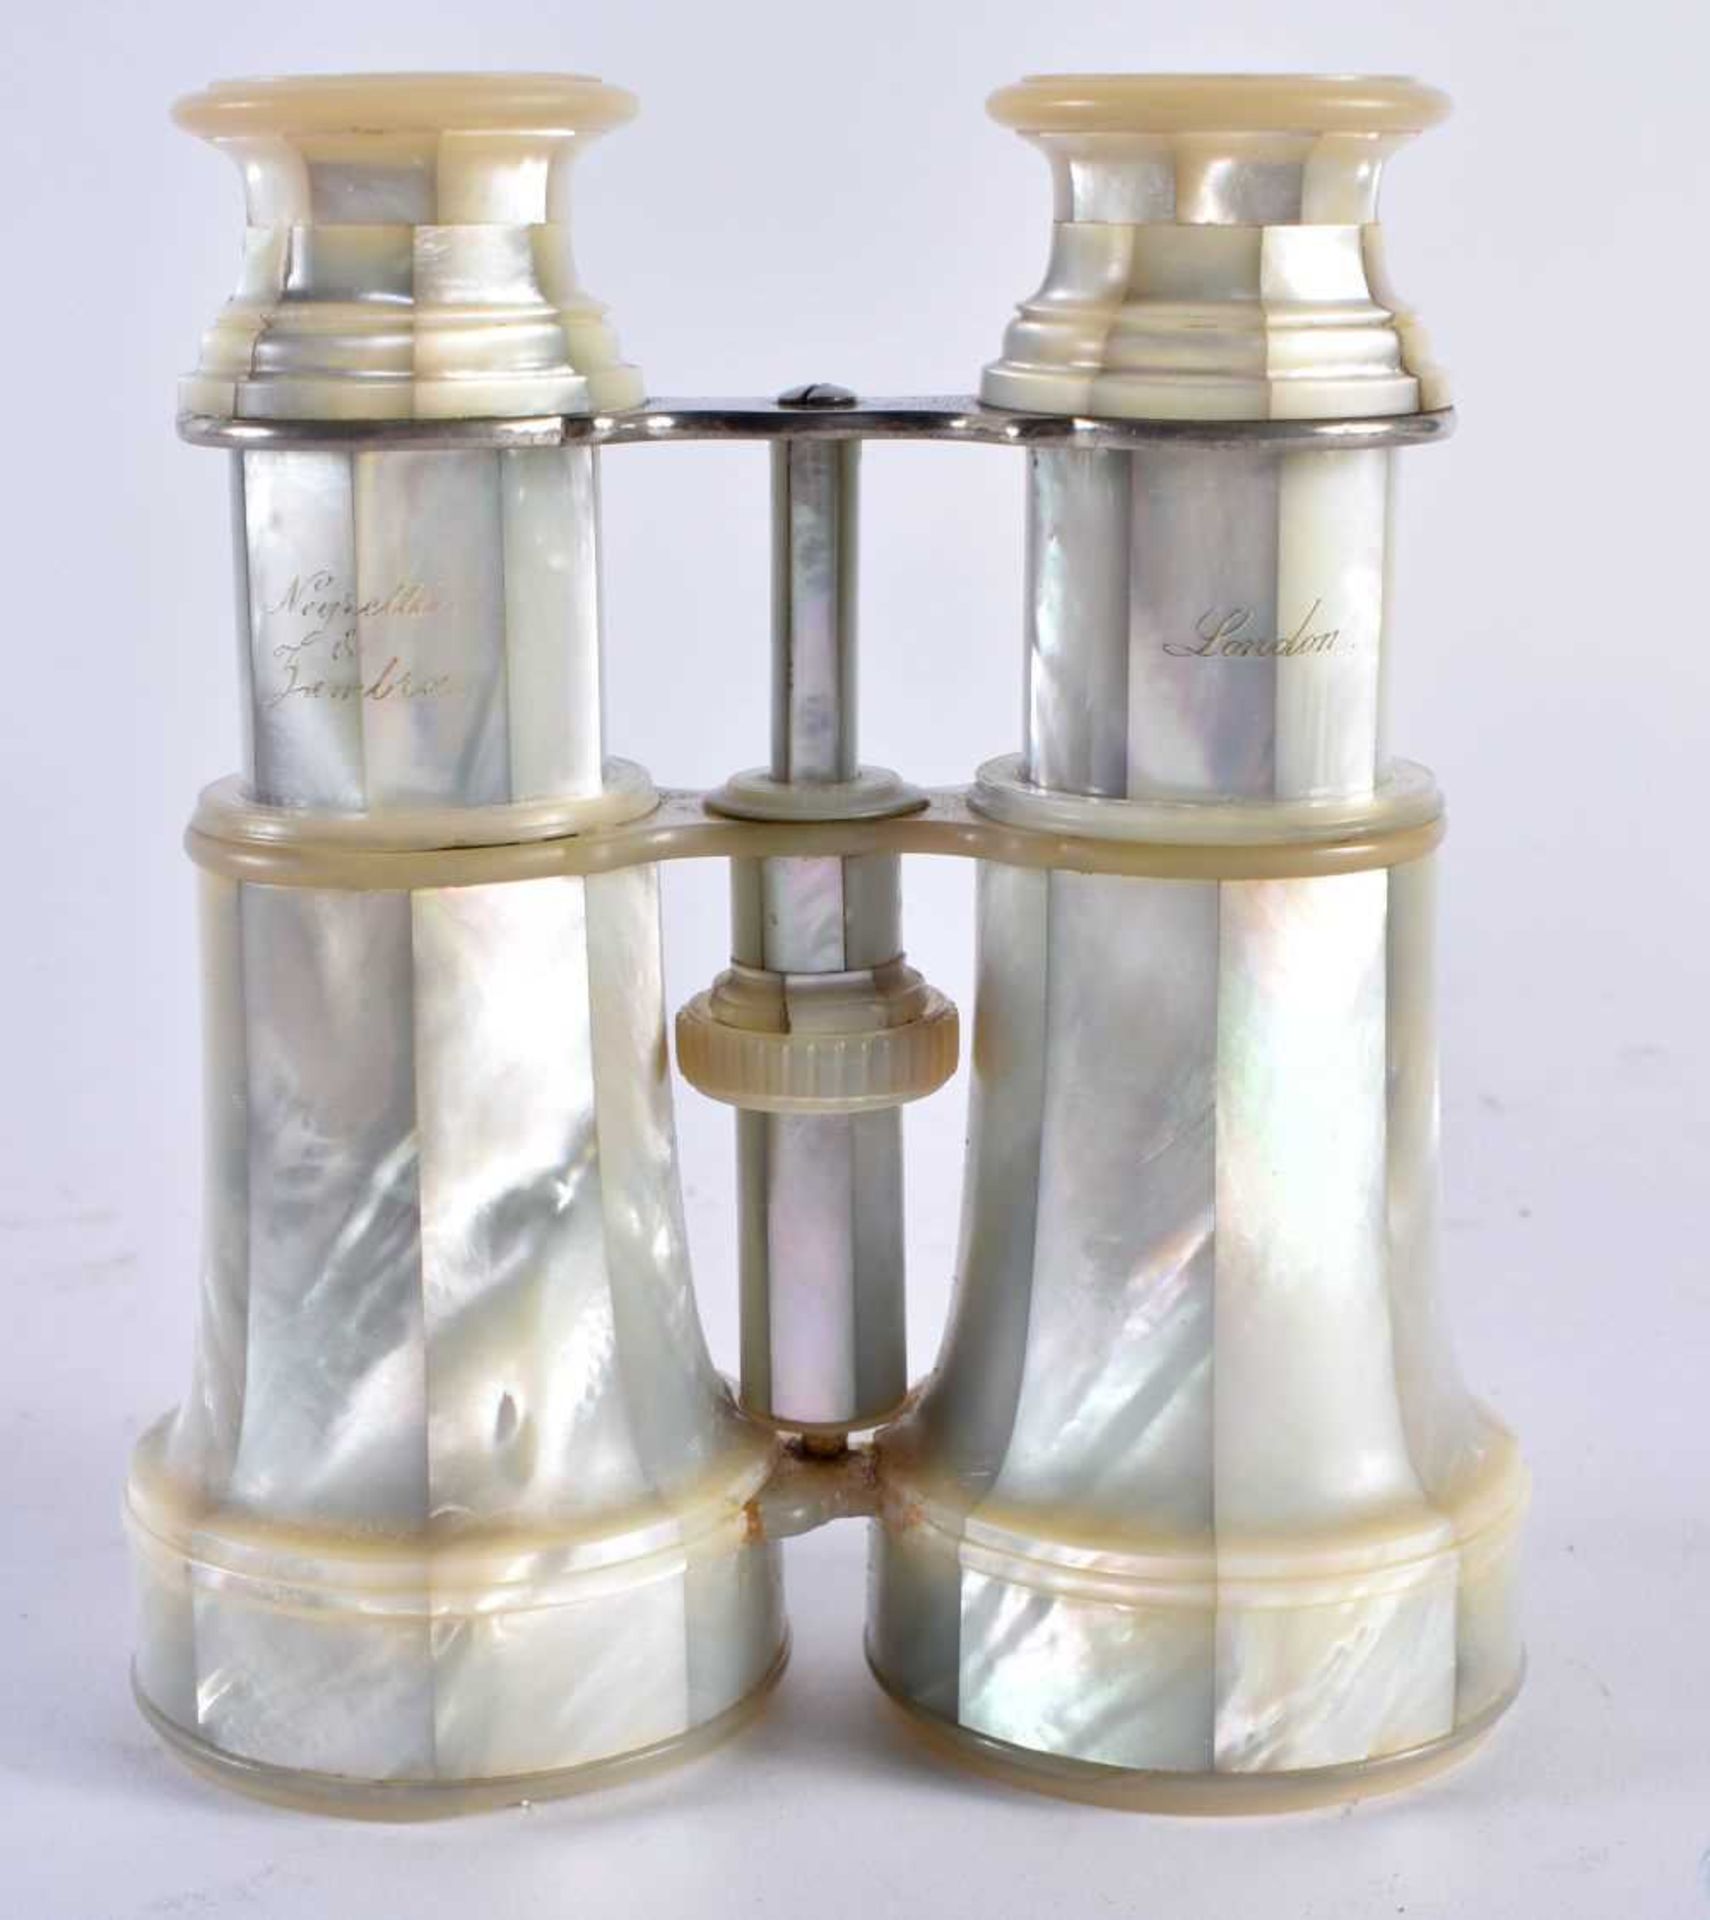 A FINE LARGE PAIR OF FULL MOTHER OF PEARL NEGRETTI & ZAMBRA OPERA GLASSES of exceptional quality. 14 - Image 3 of 7